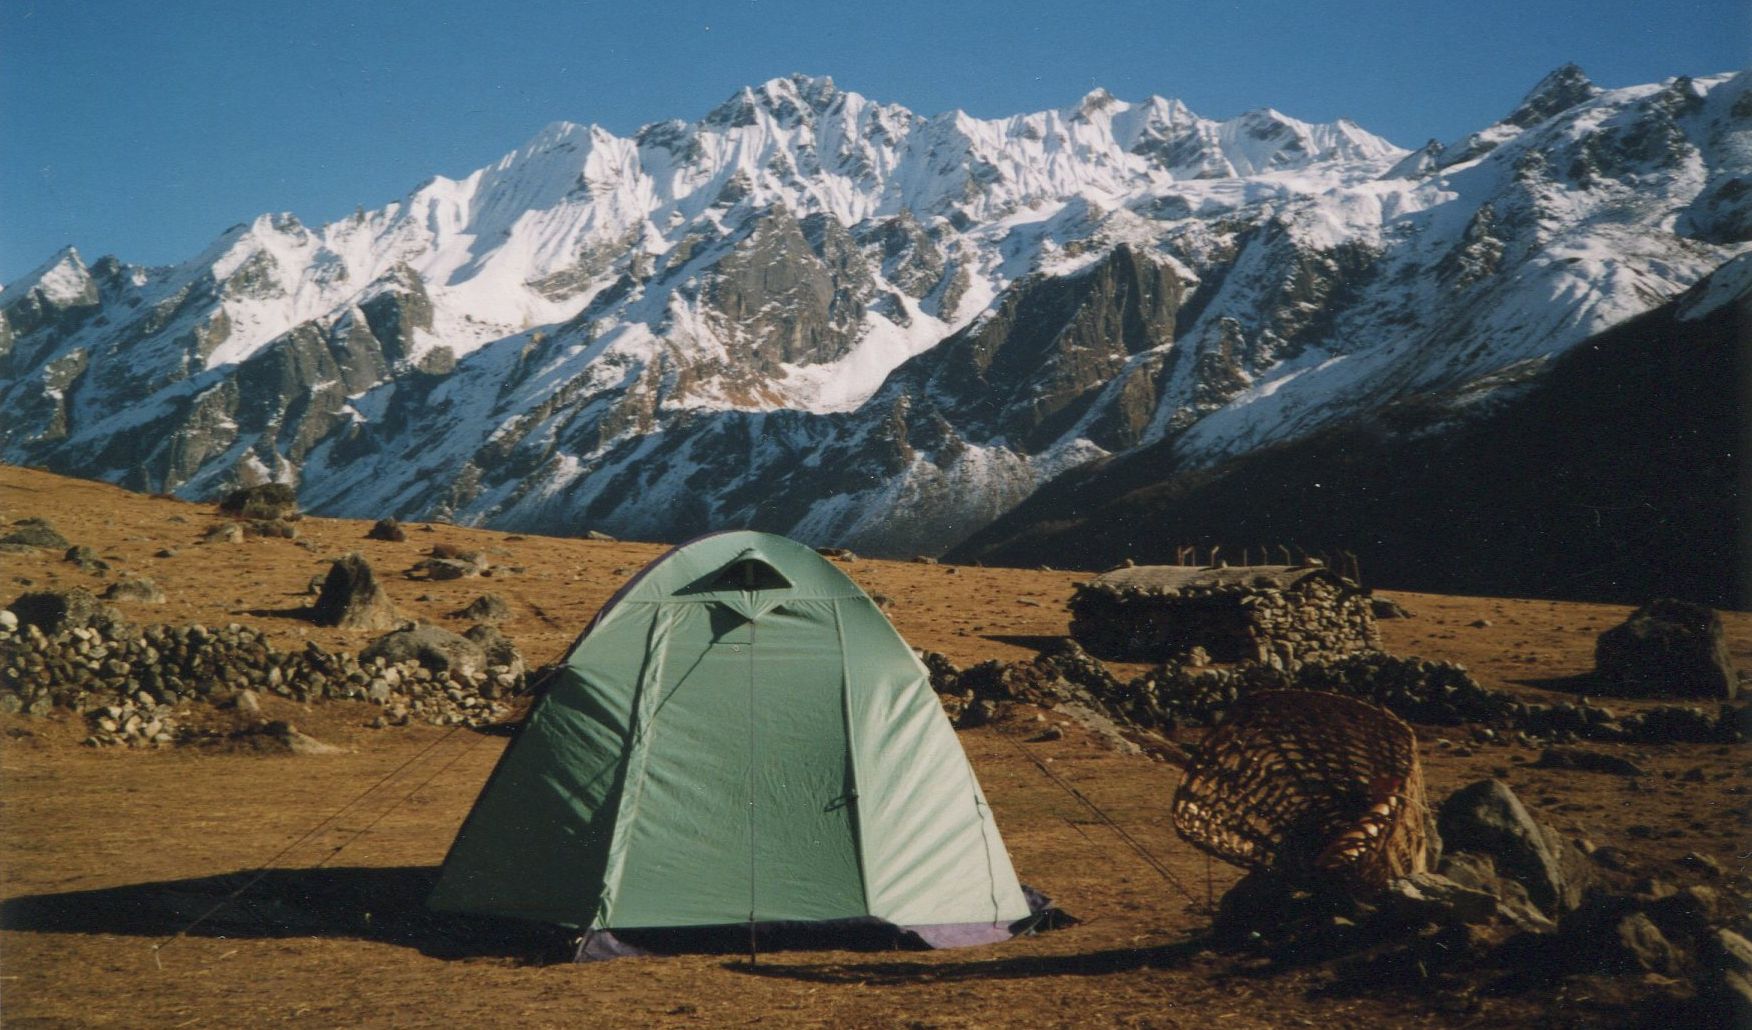 Mt.Pangen Dobku from Kyanjin in the Langtang Valley